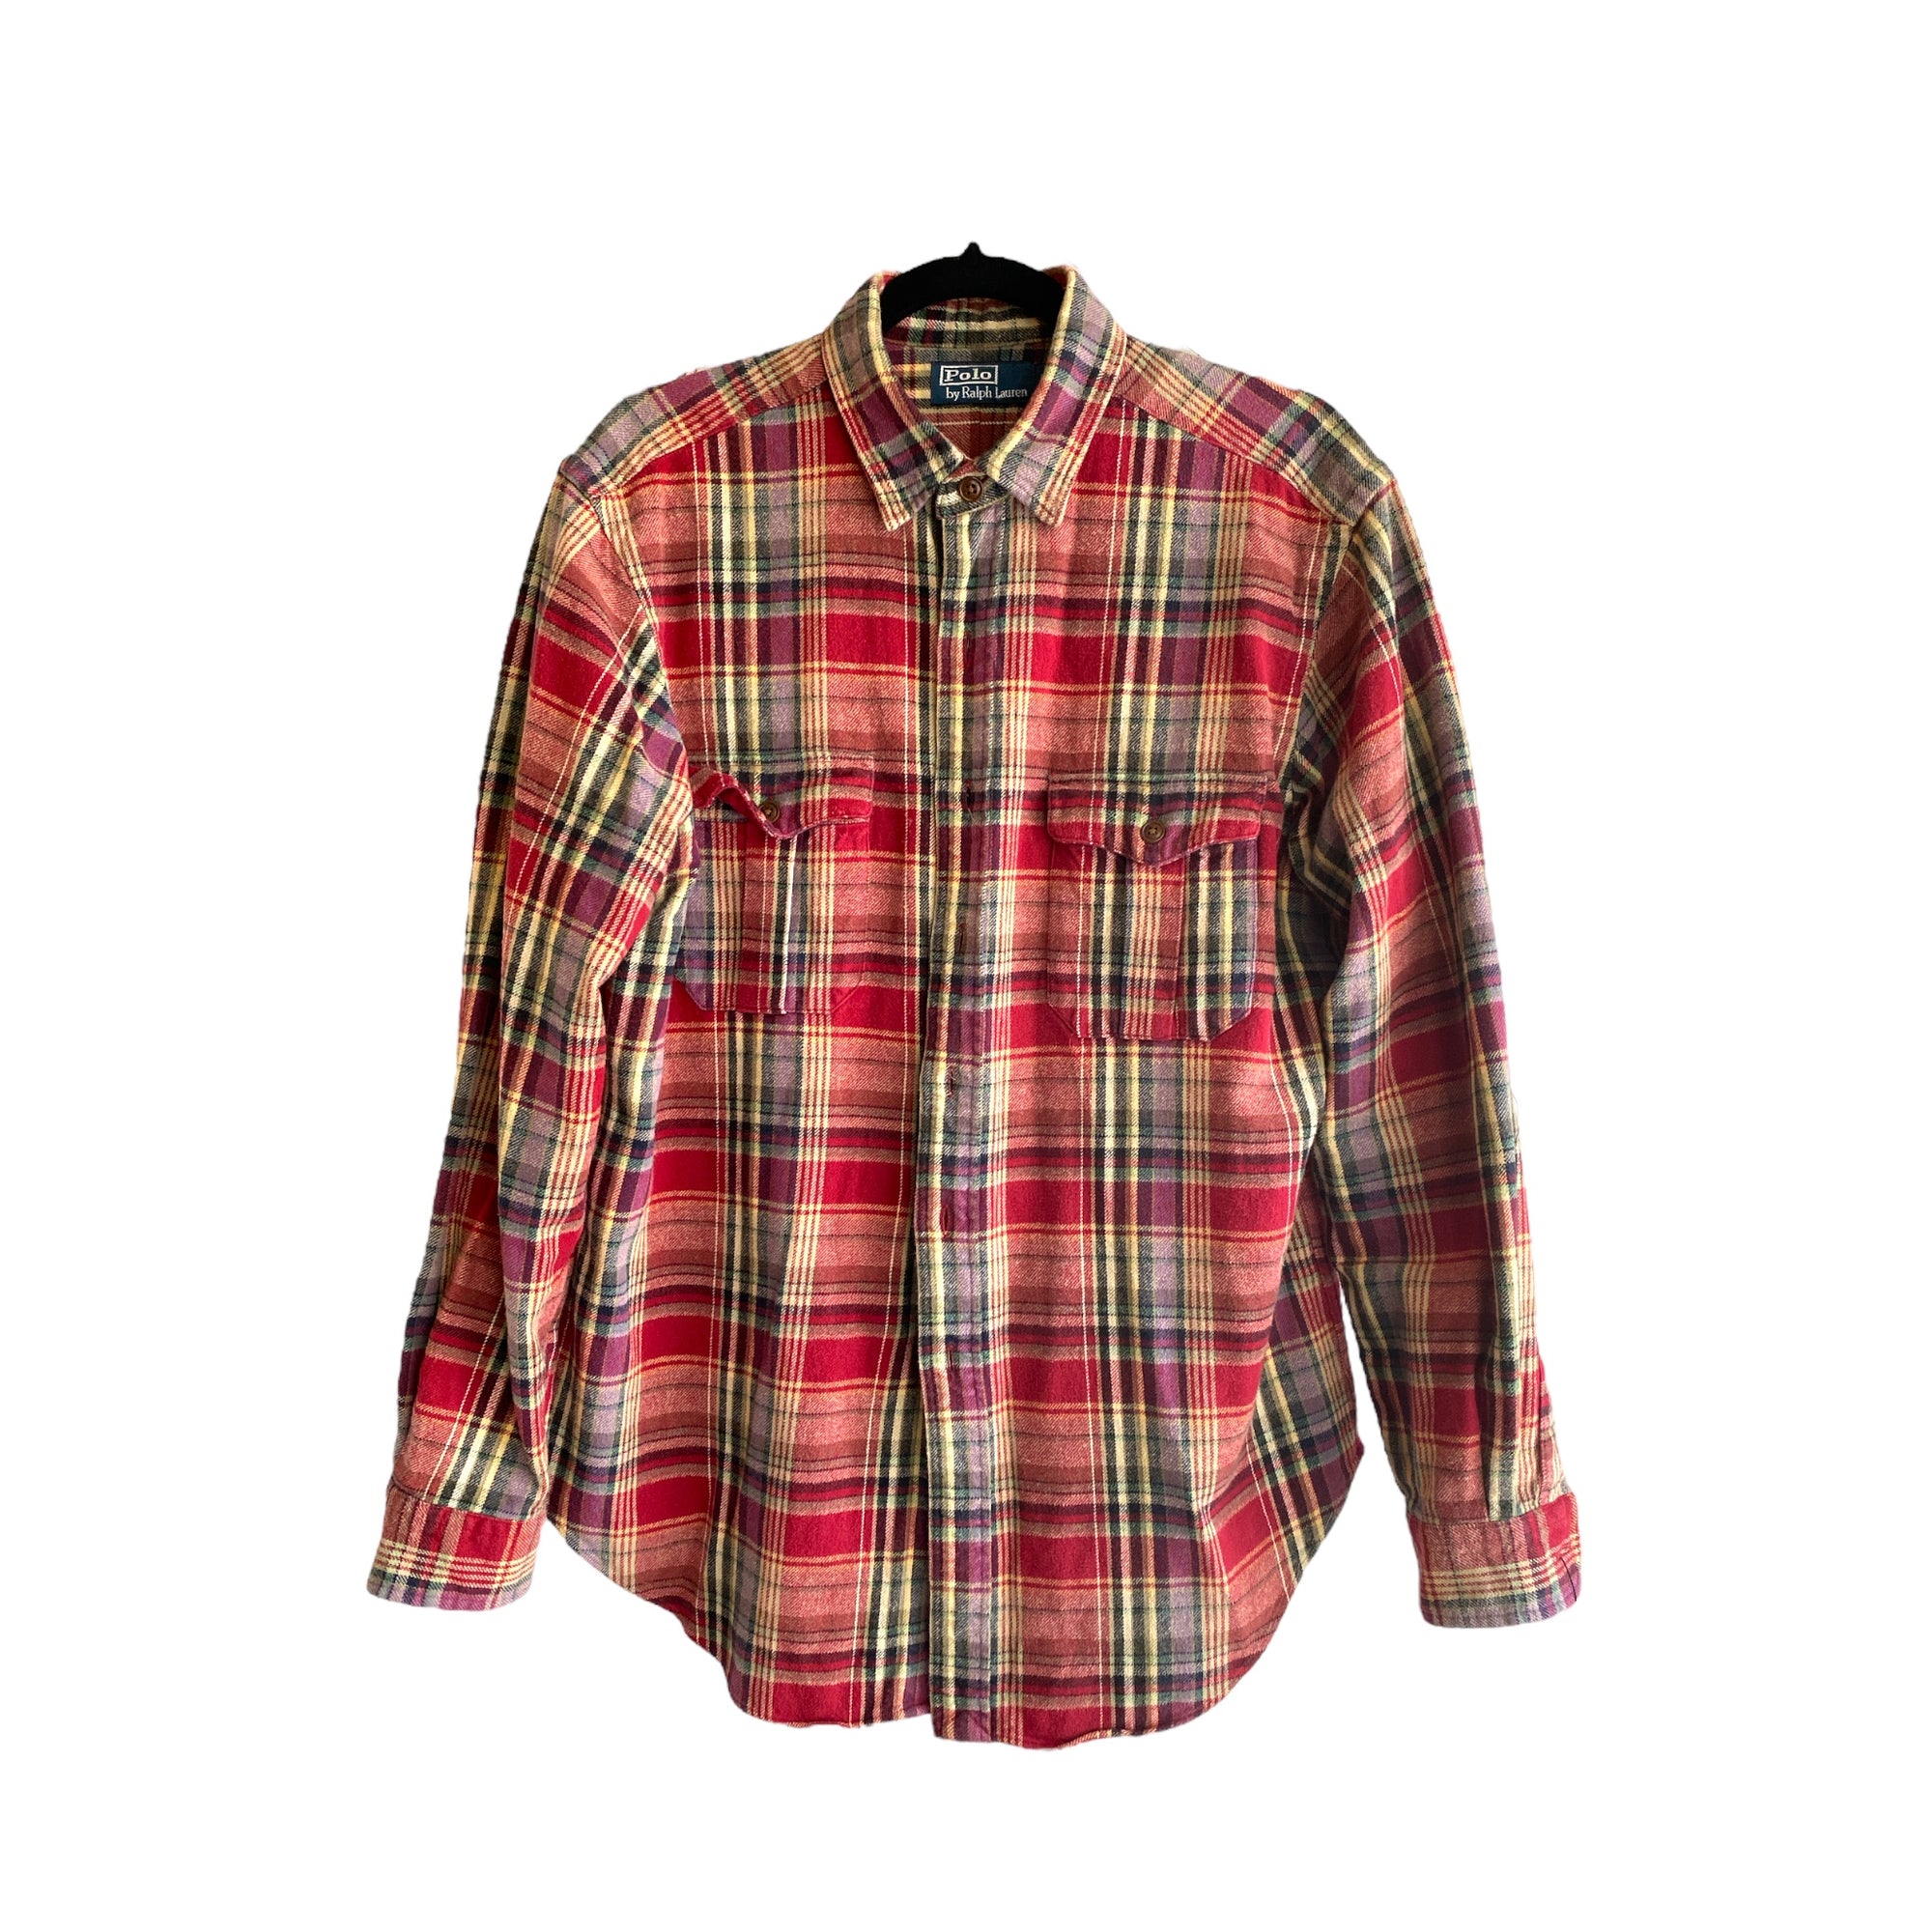 90s Polo Ralph Lauren Red Plaid Shirt Elbow Patches